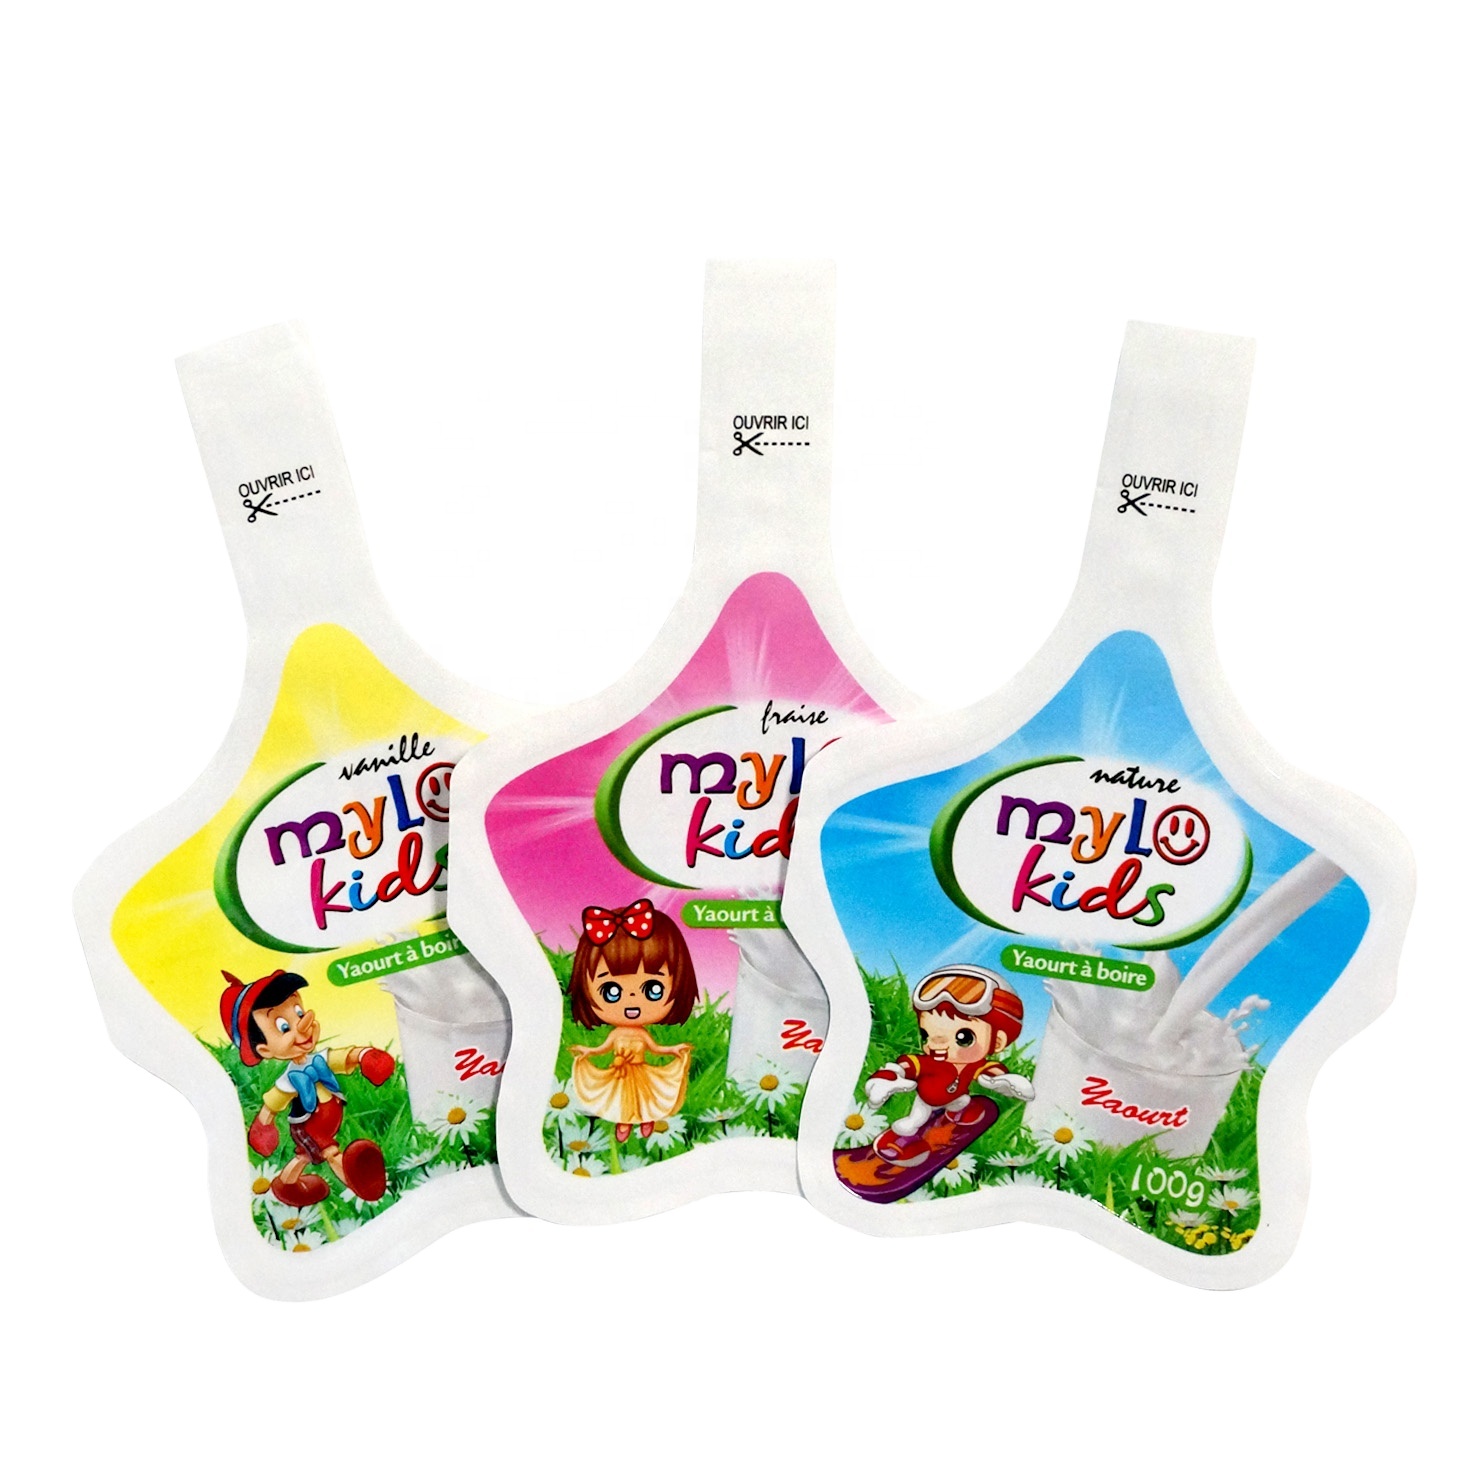 DQ PACK Custom Printing Vietnam Thailand Yogurt Fruity Pudding Jelly Injection Pouch Bag